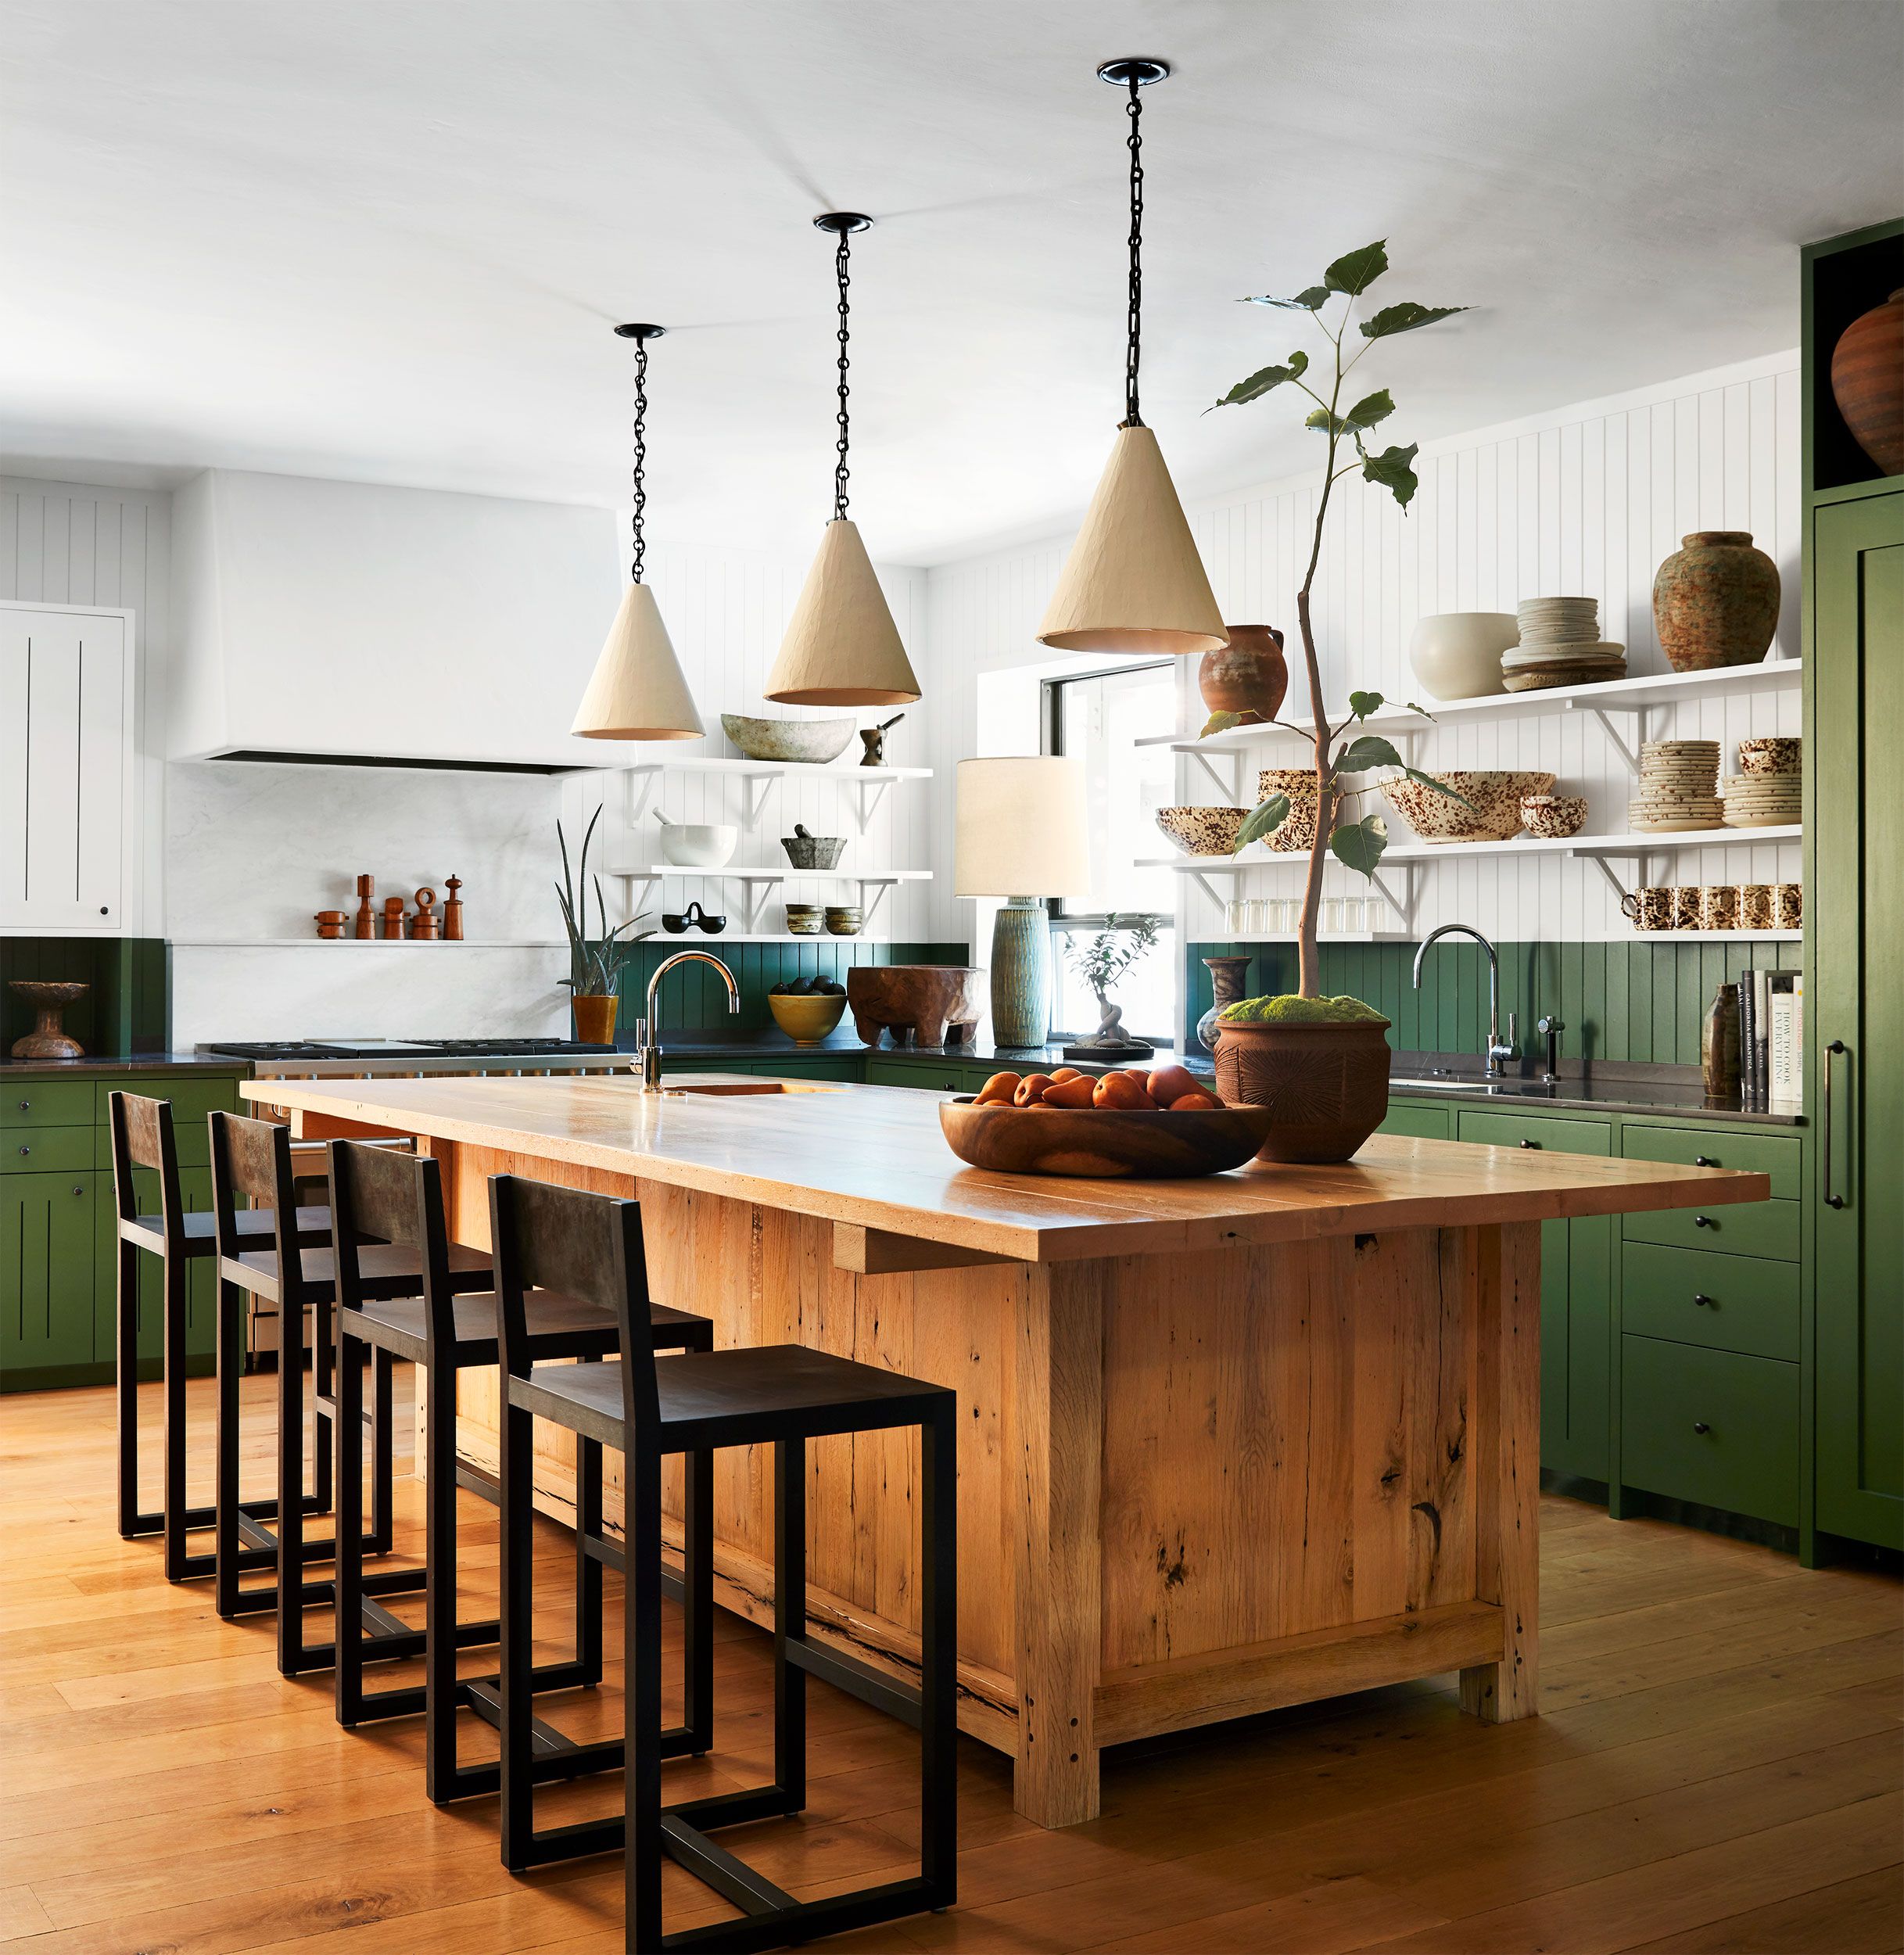 50 Best Kitchen Paint Colors, How To Choose The Right Paint Color For Your Kitchen